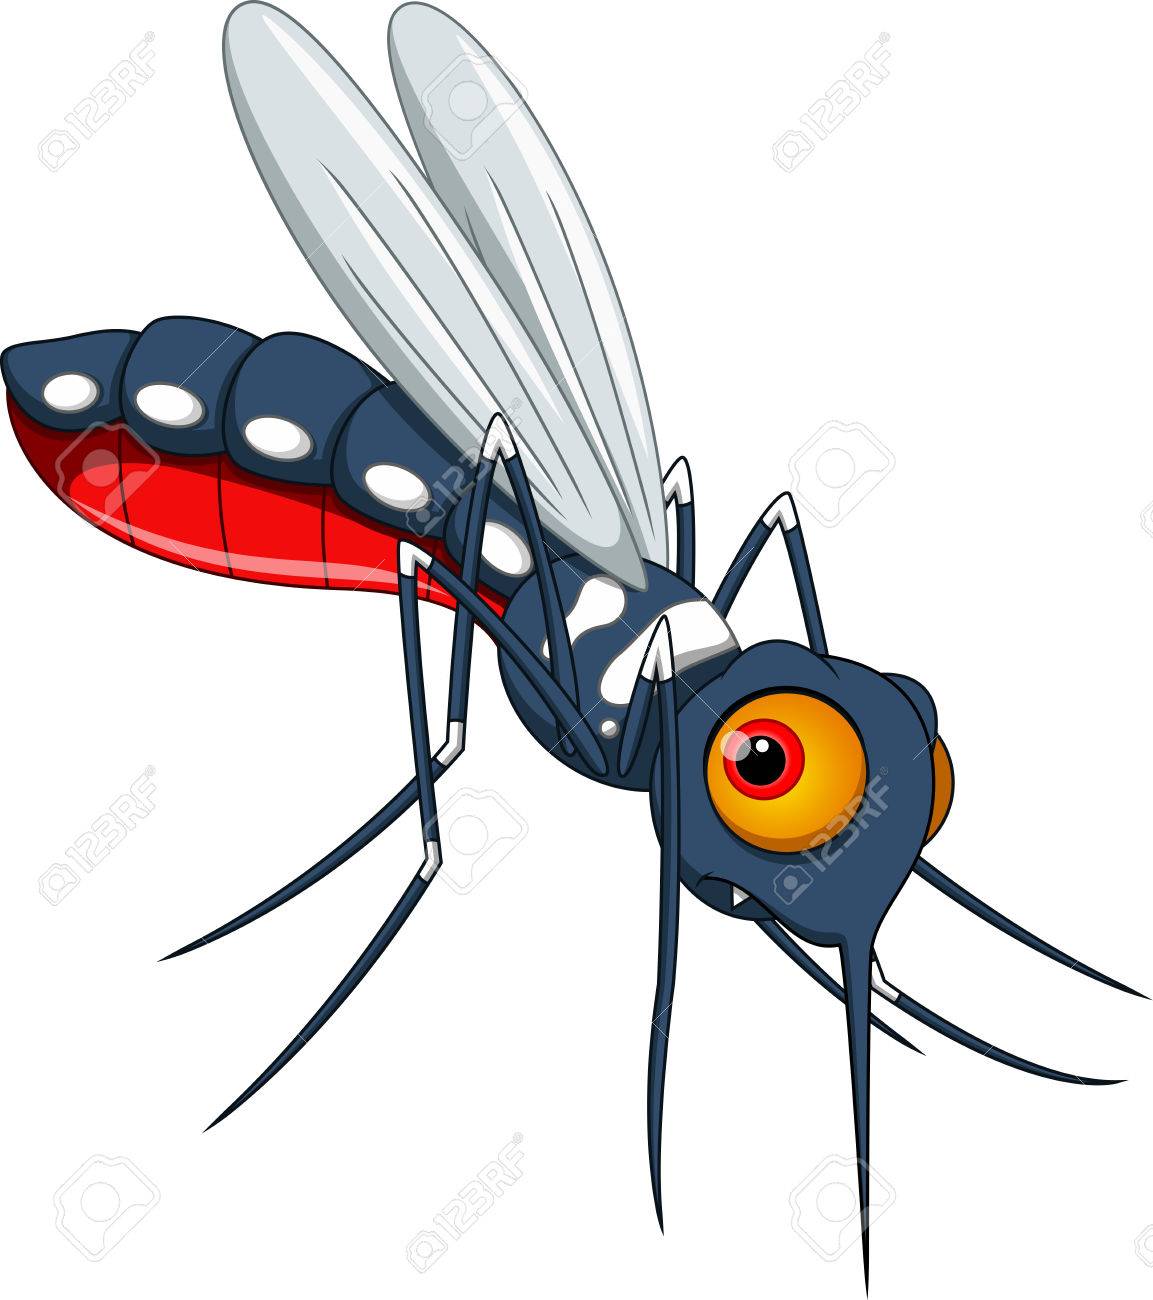 Free download best . Mosquito clipart cute